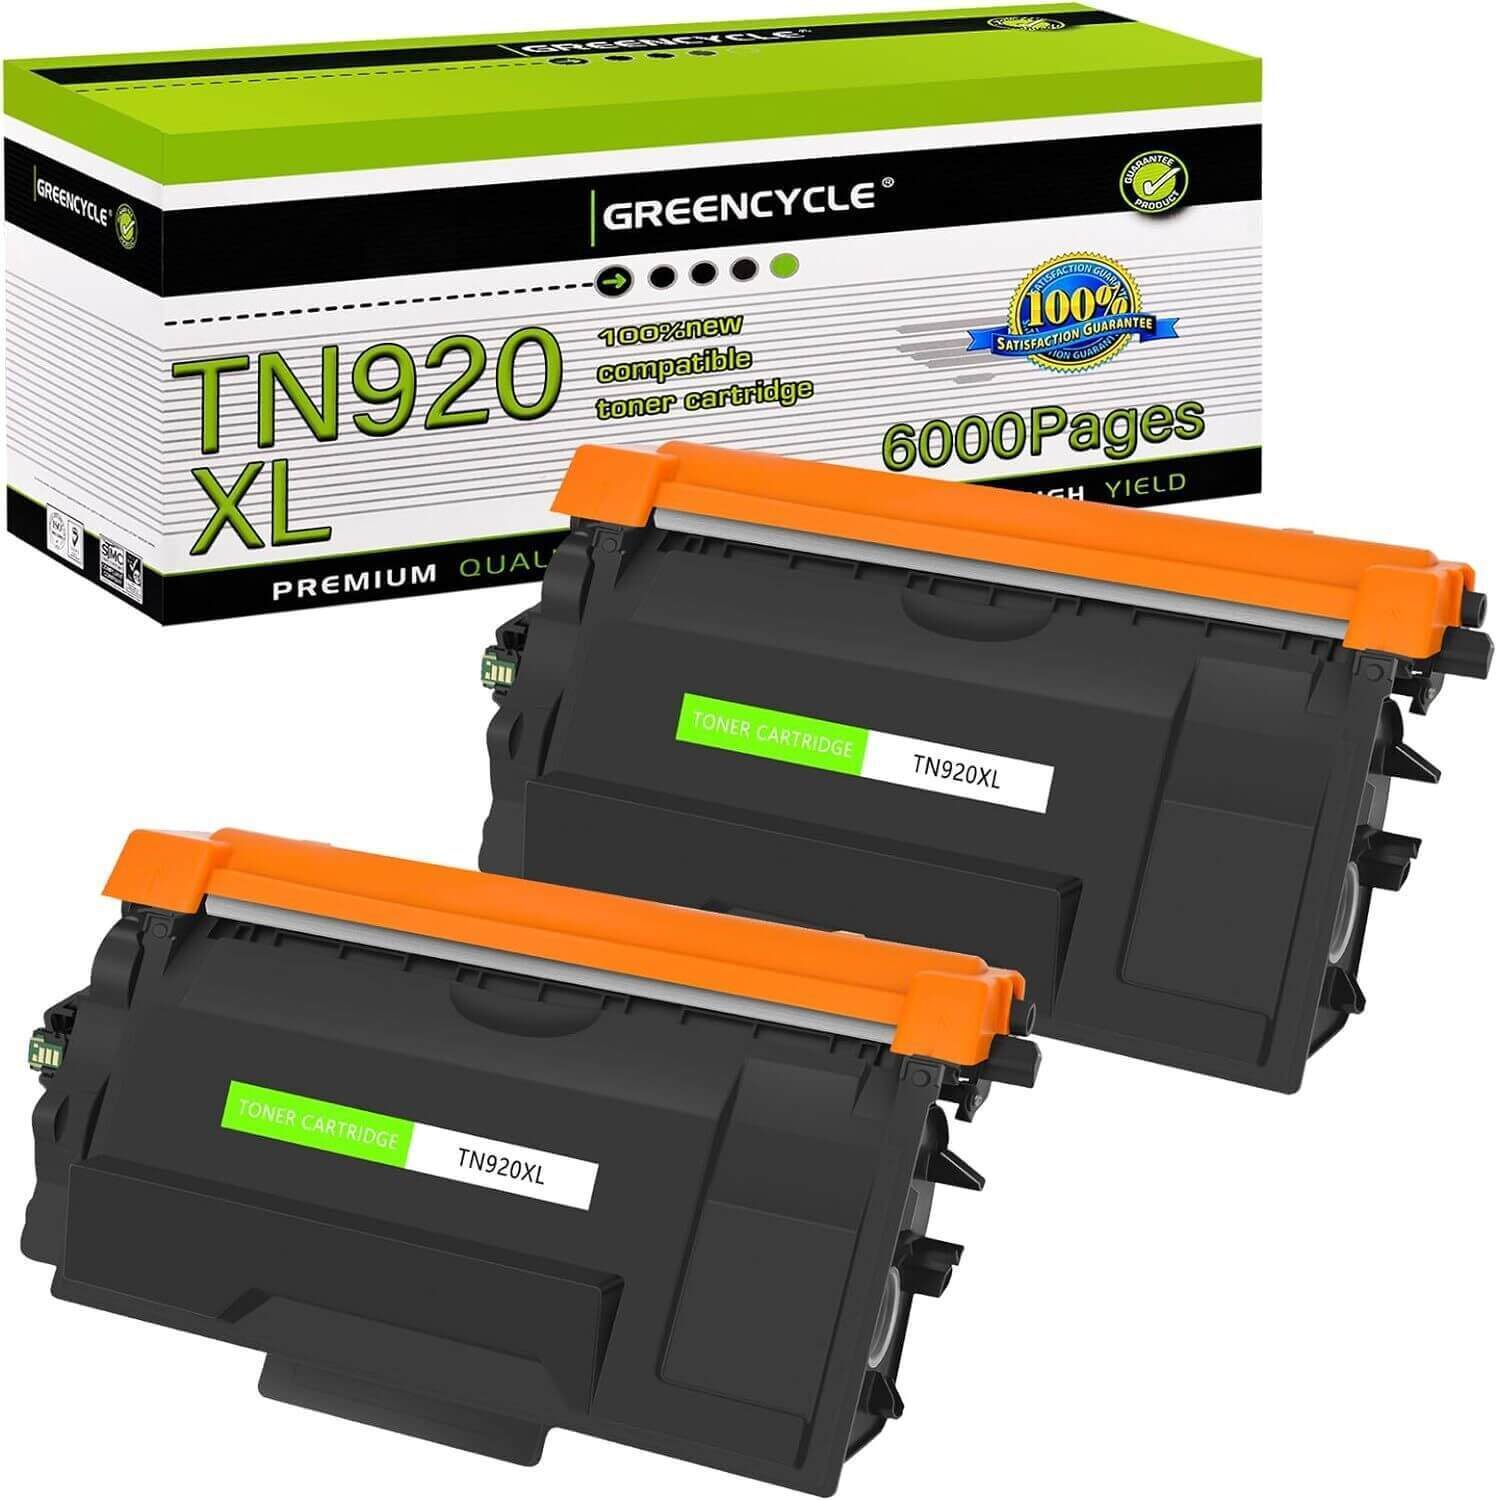 TN920XL High Yield Black Toner Compatible for Brother HL-L6310DW MFC-L6810DW 2PK